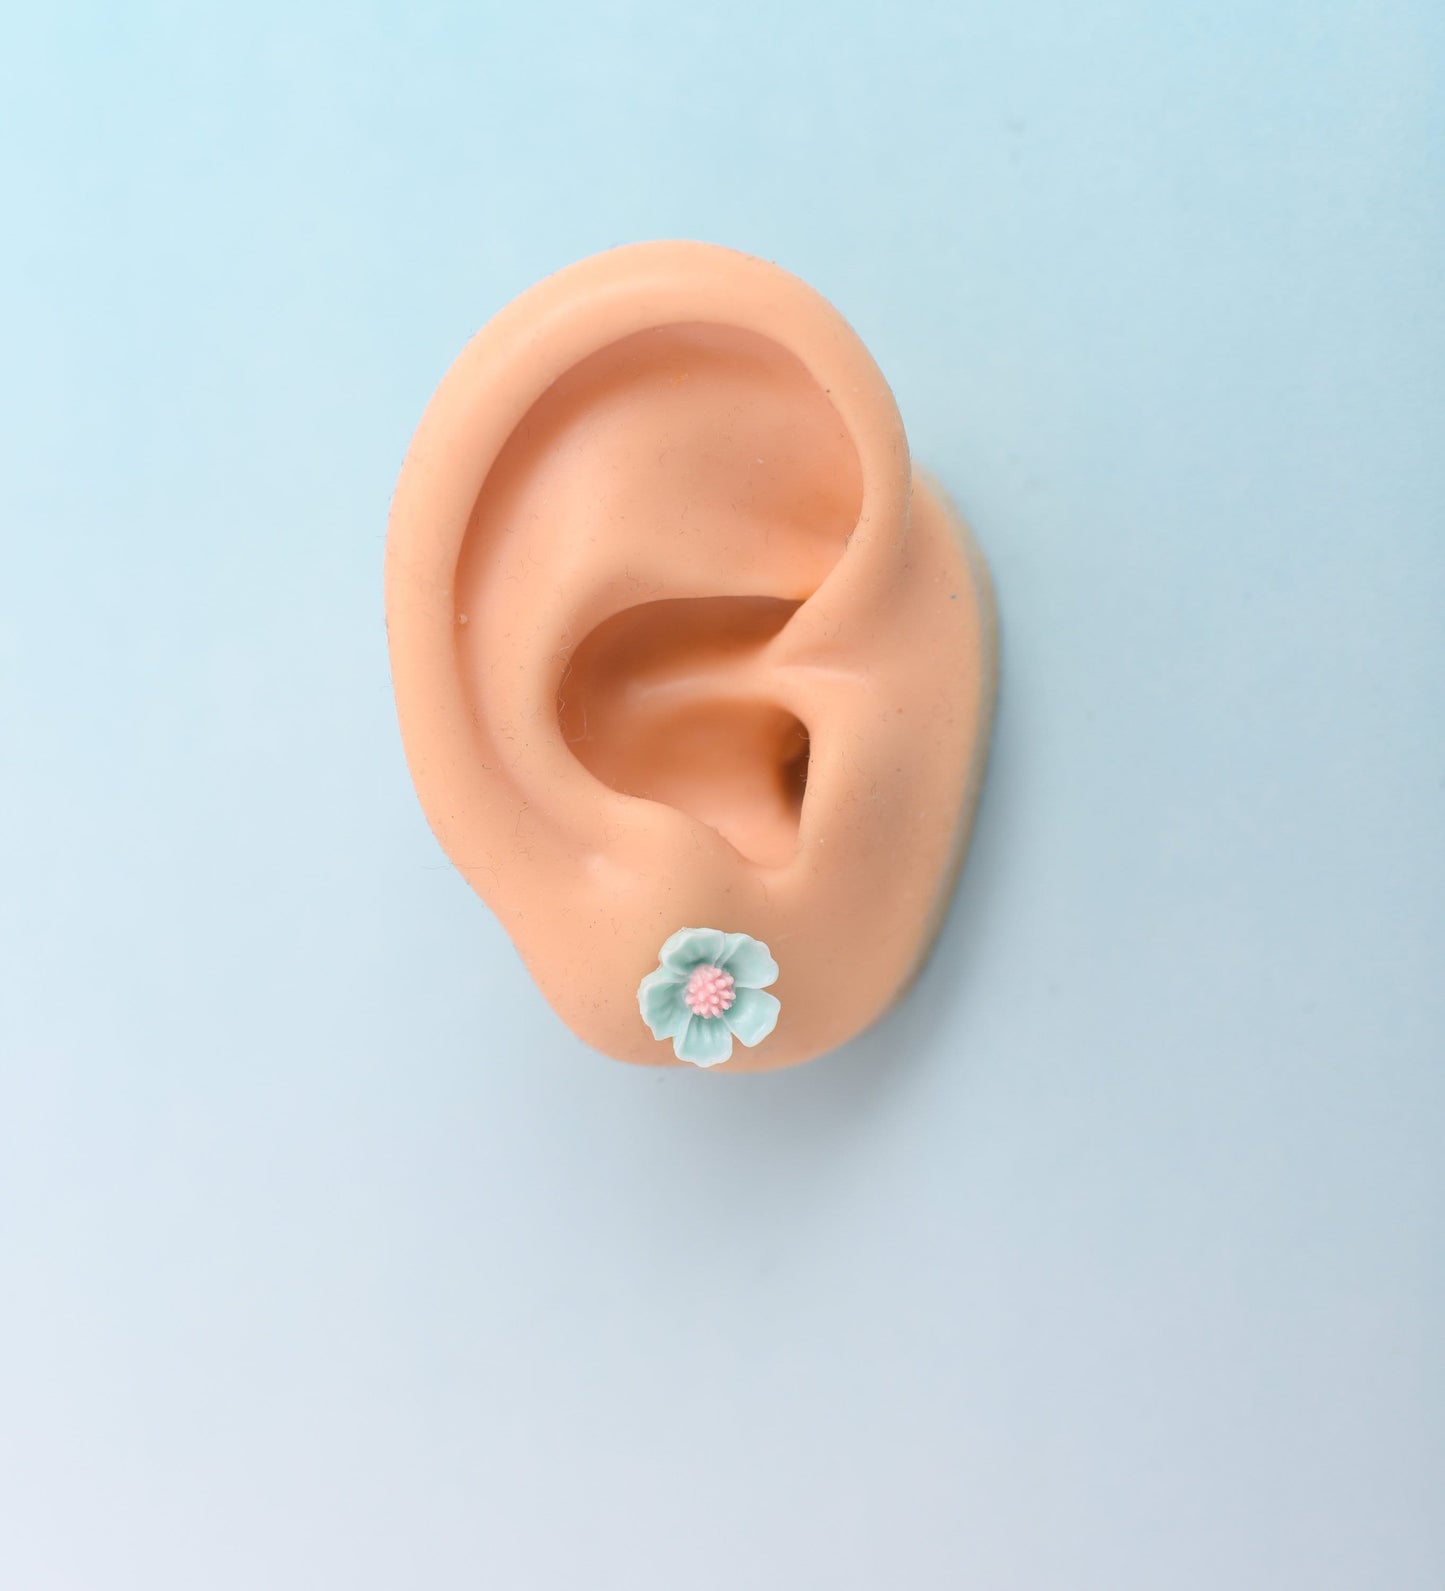 Pastel Flower Earring Trio with Titanium Posts- Choose Color Combo